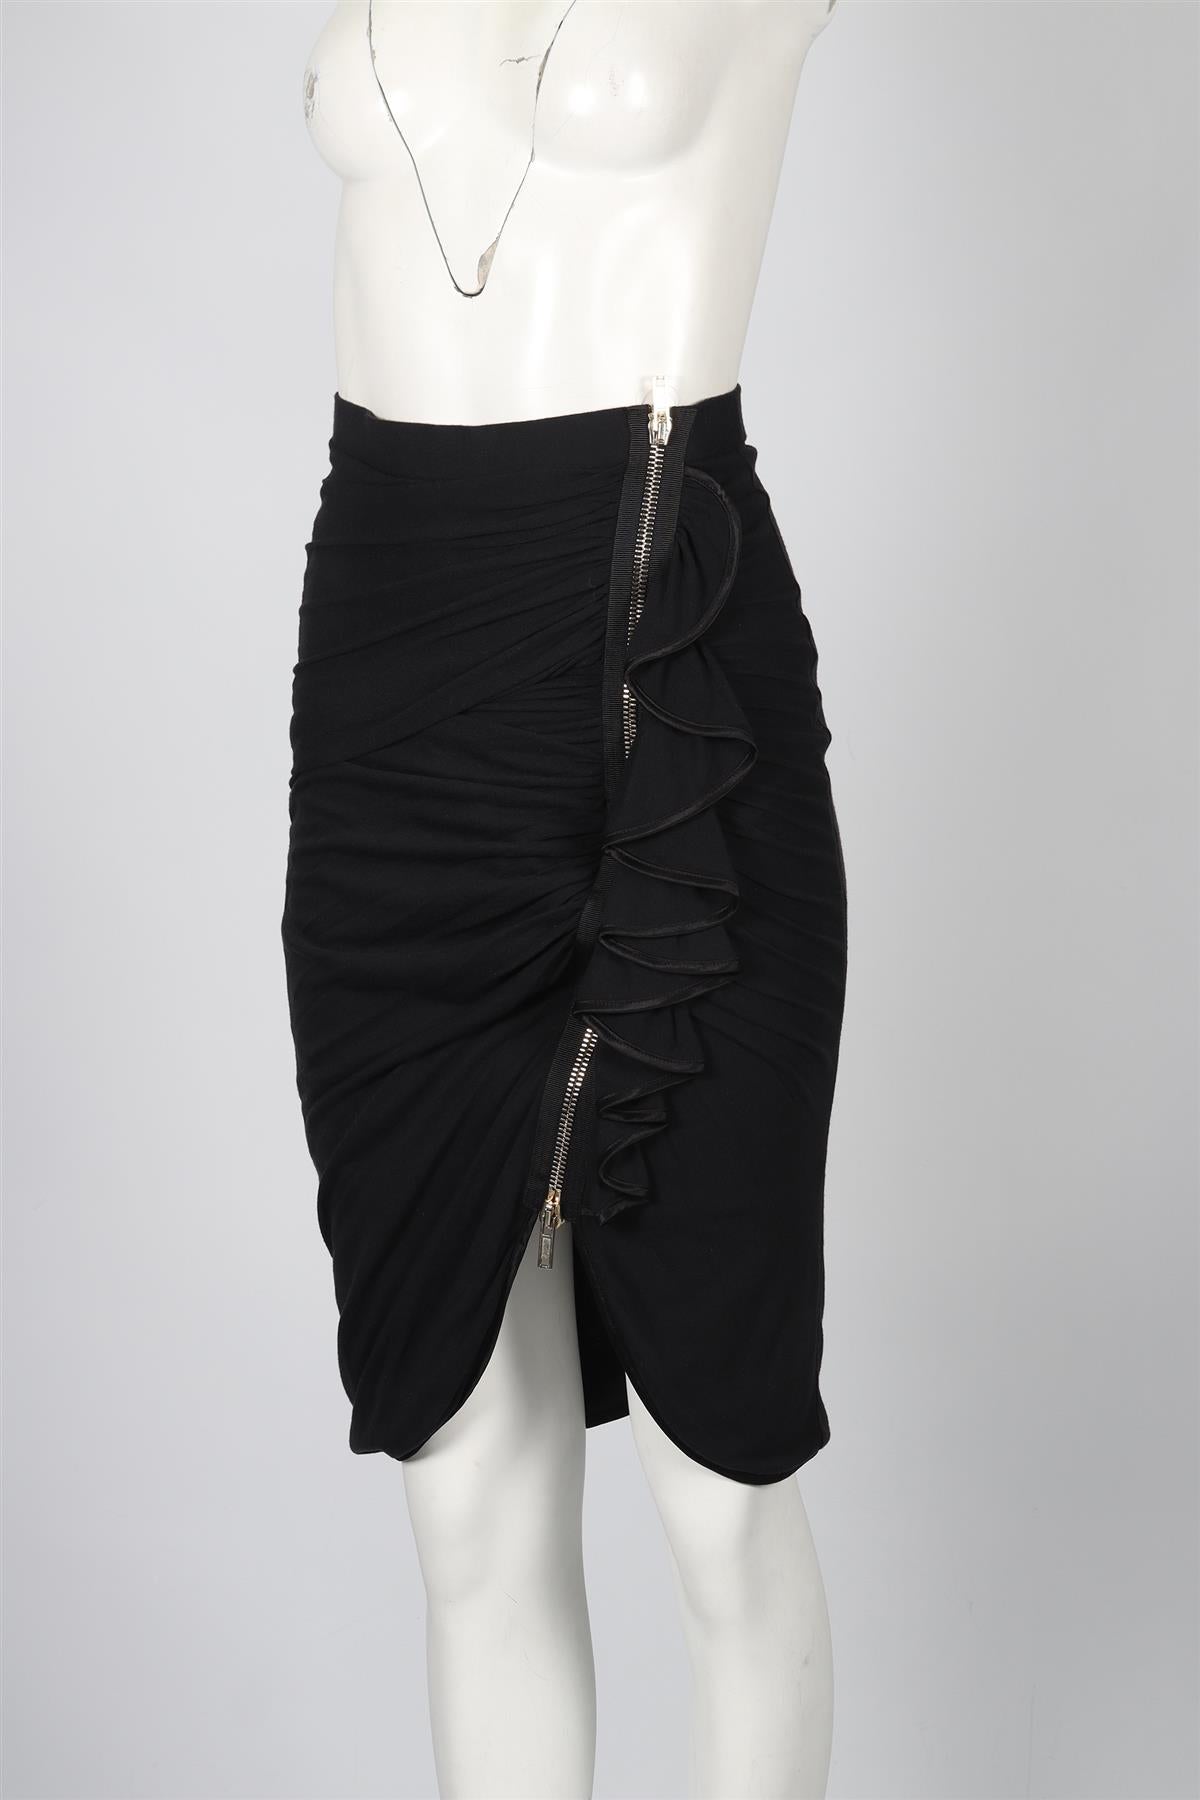 GIVENCHY CASHMERE AND SILK BLEND MINI SKIRT FR 38 UK 10